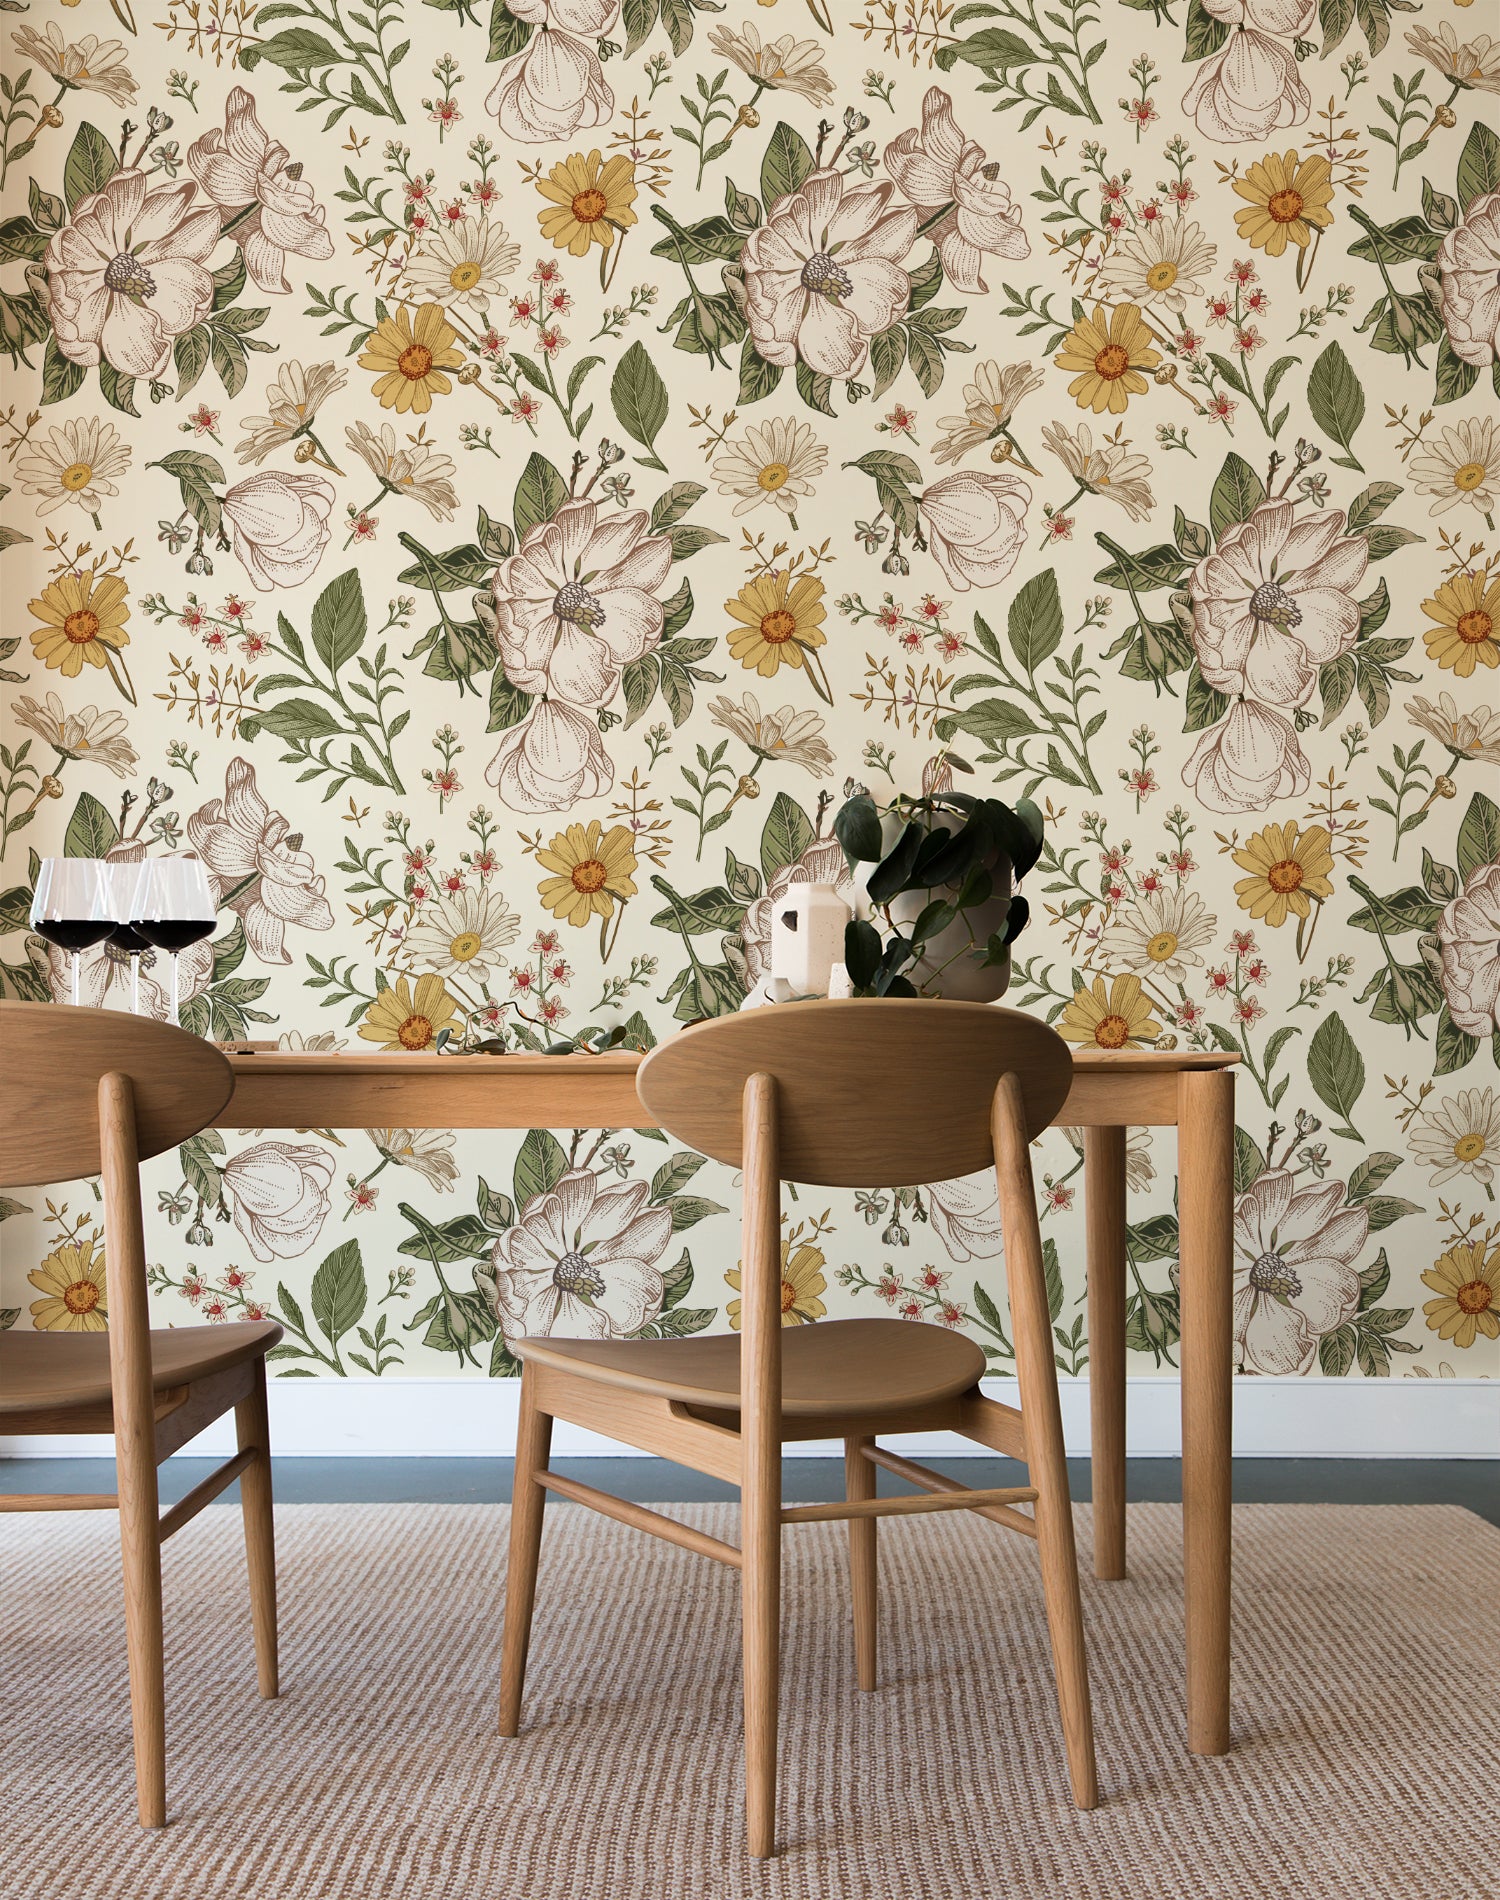 A dining area with natural wood furniture against a wall covered in Floral Wallpaper - Sunny, which displays a vibrant array of hand-drawn flowers in yellows and greens on a cream background, creating a fresh and inviting botanical theme.